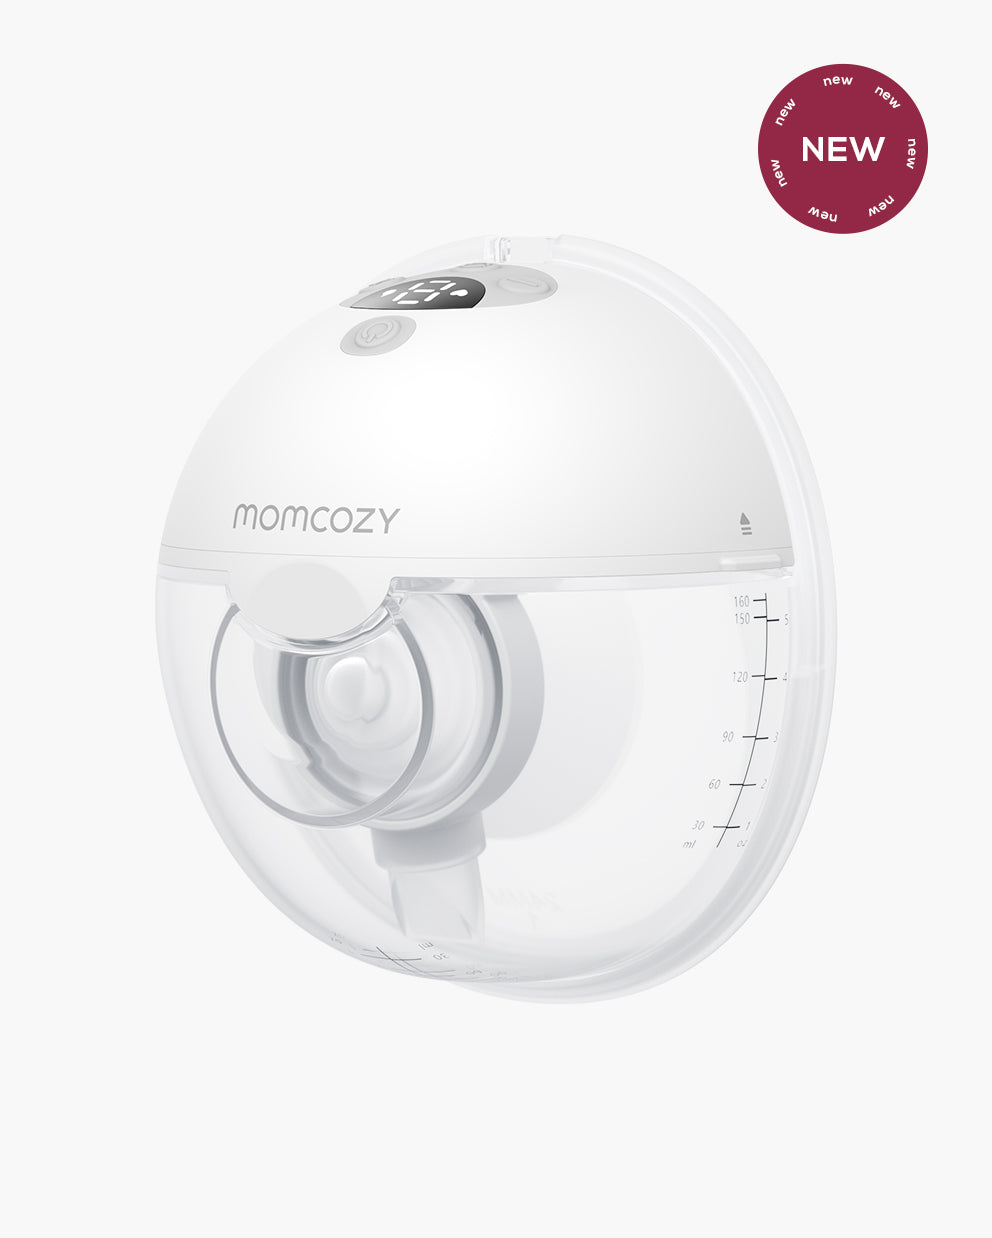 MomCozy M5 Wearable Double Breast Pump